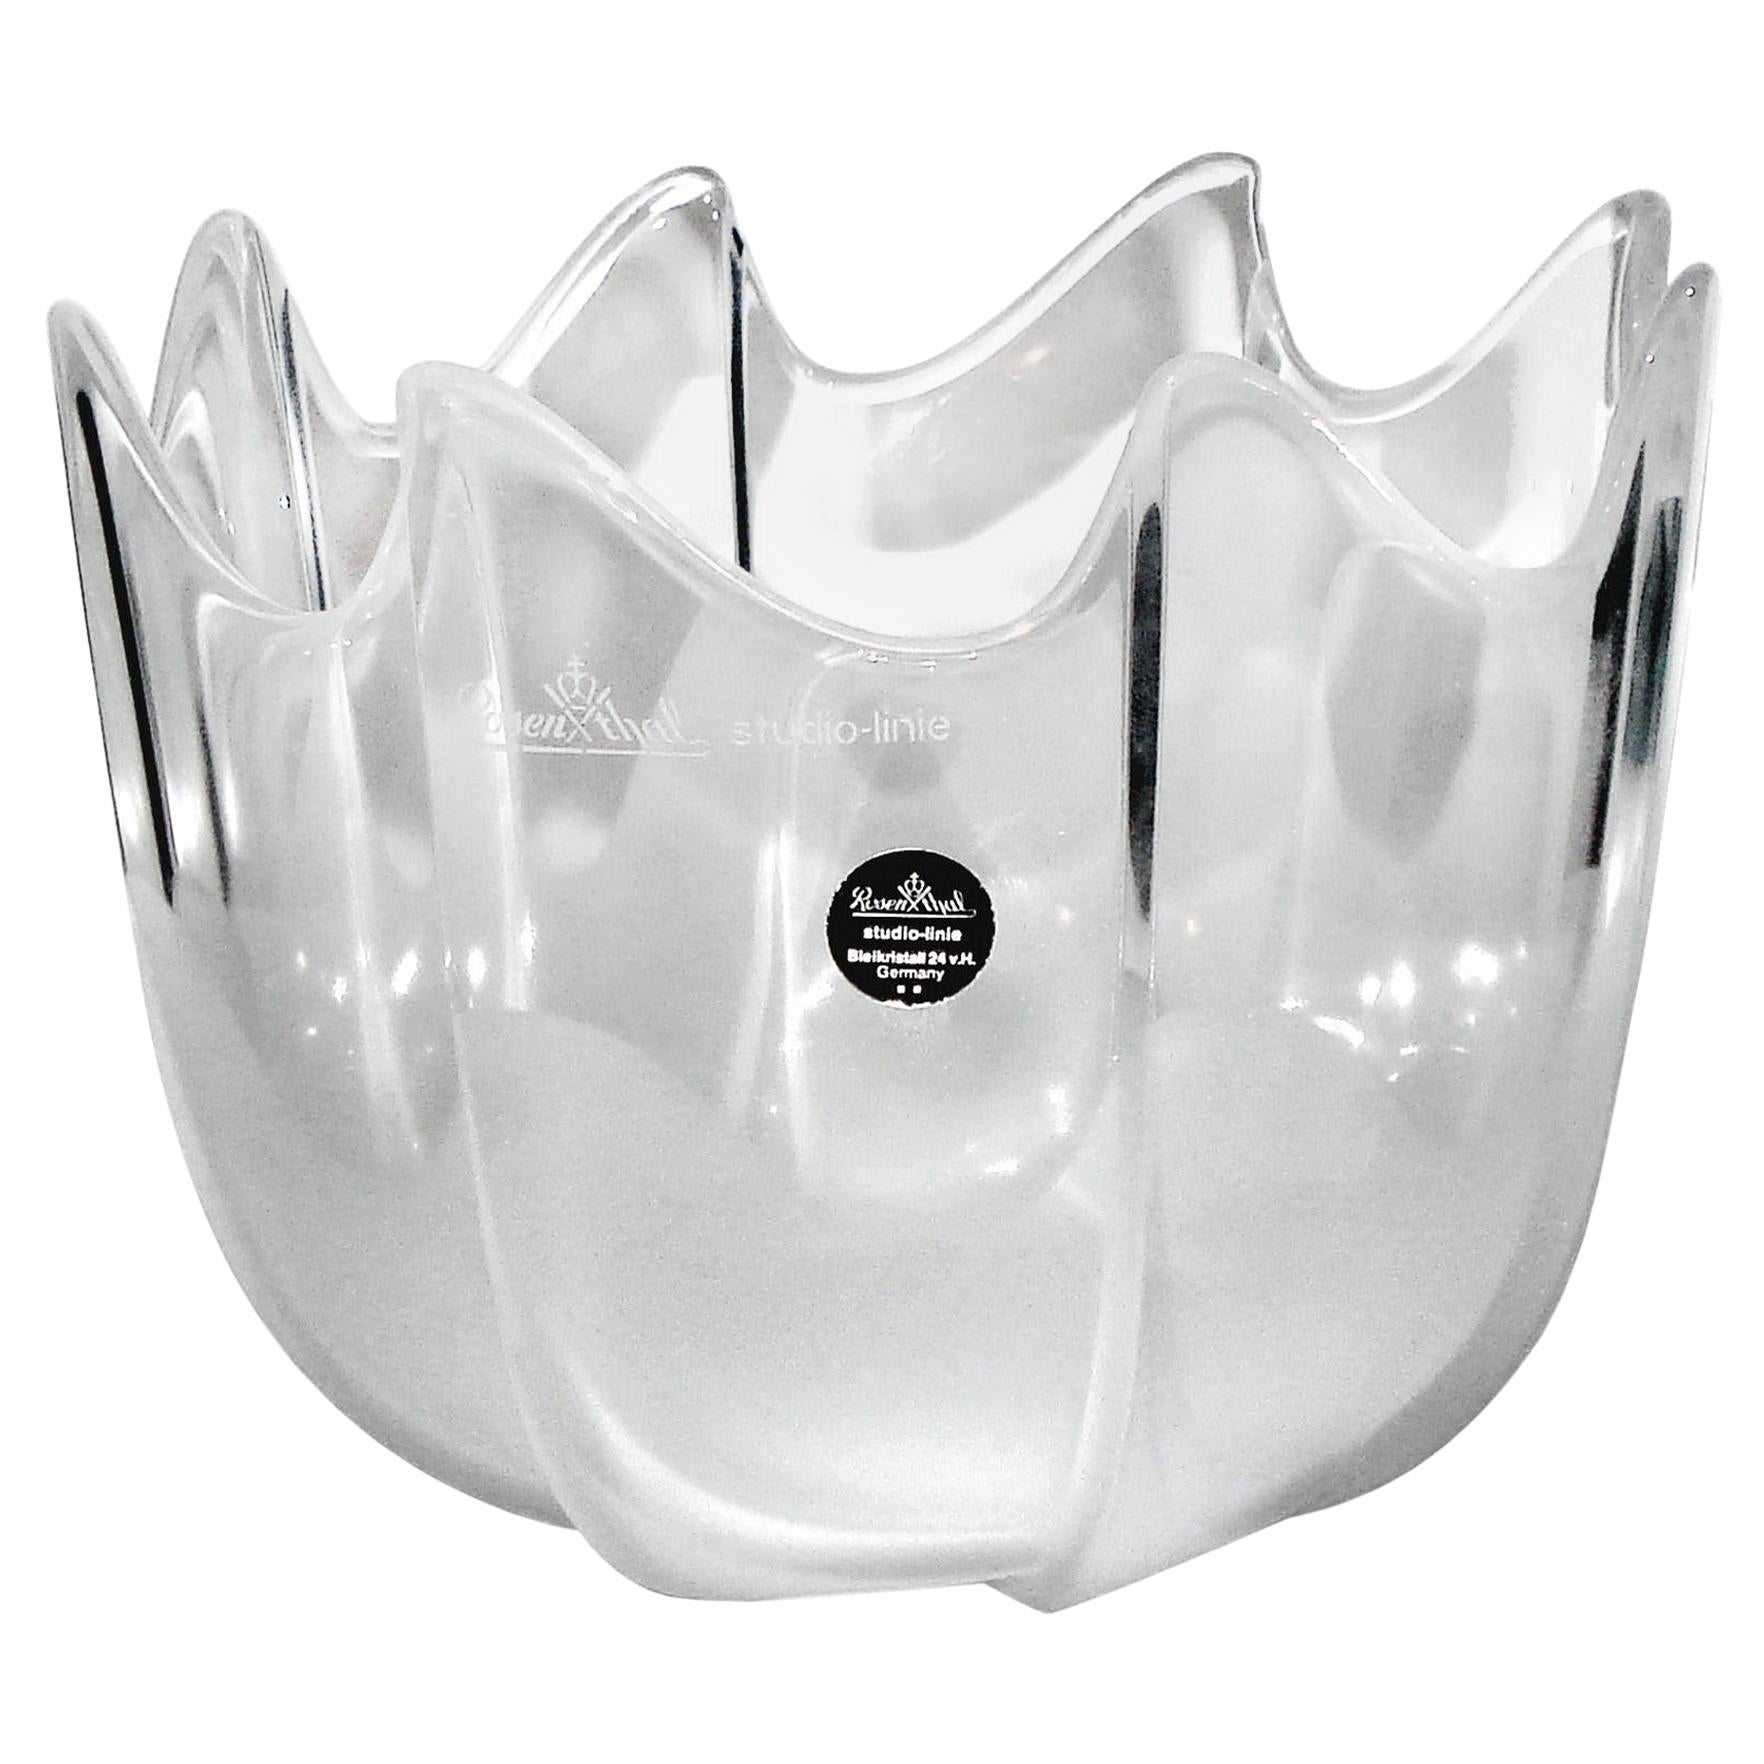 Rosenthal Studio-Linie Frosted Crystal Bowl